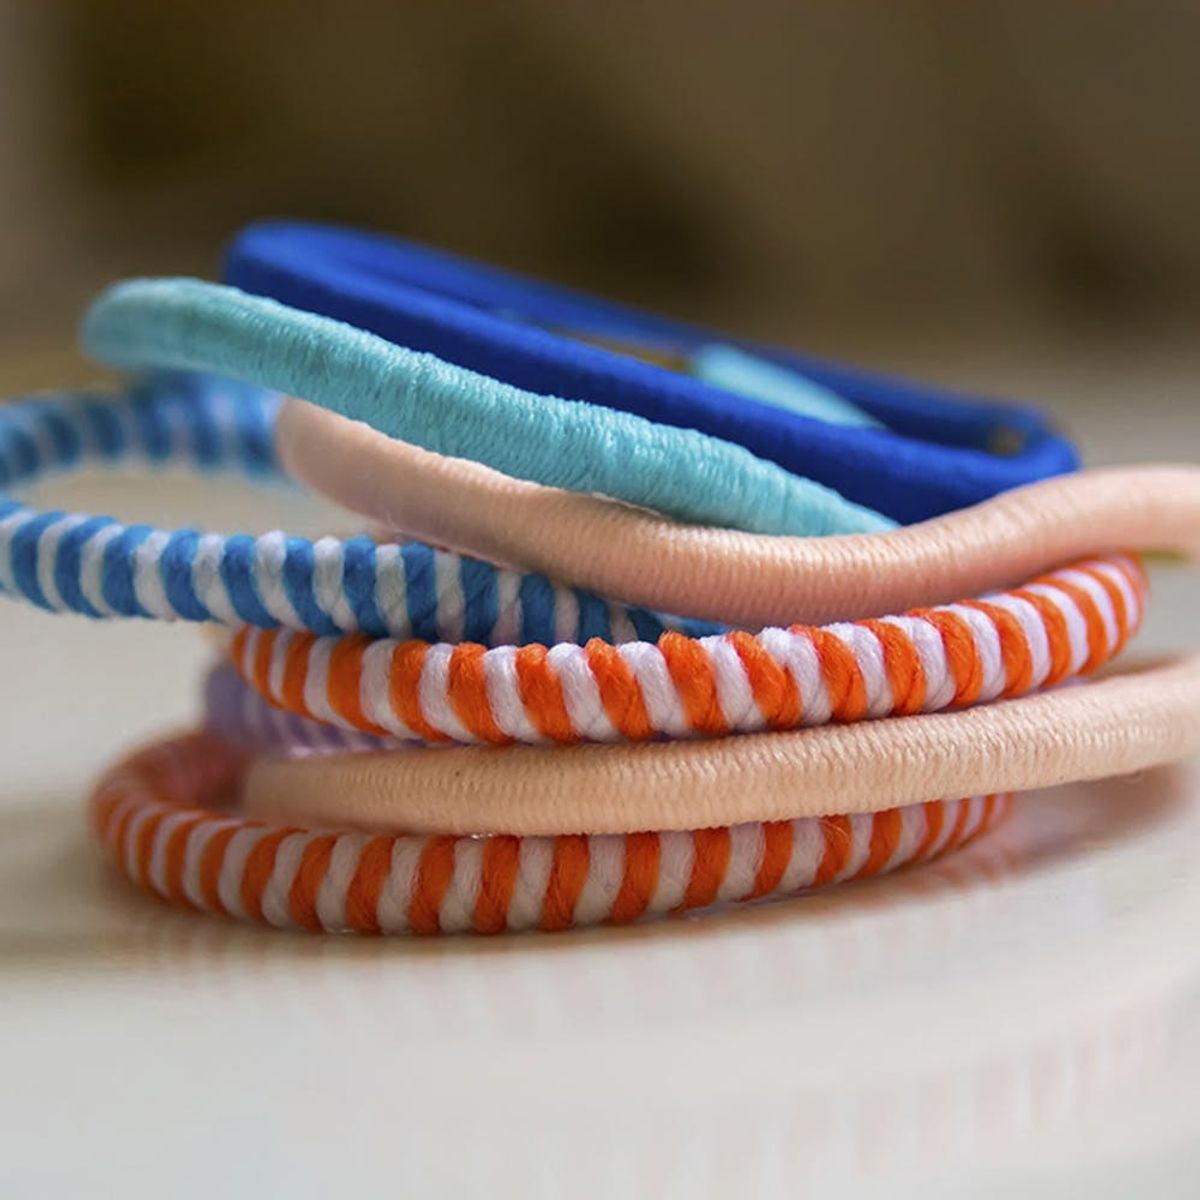 We Asked a Doctor If It Is ACTUALLY Dangerous to Wear a Hair Tie on Your Wrist